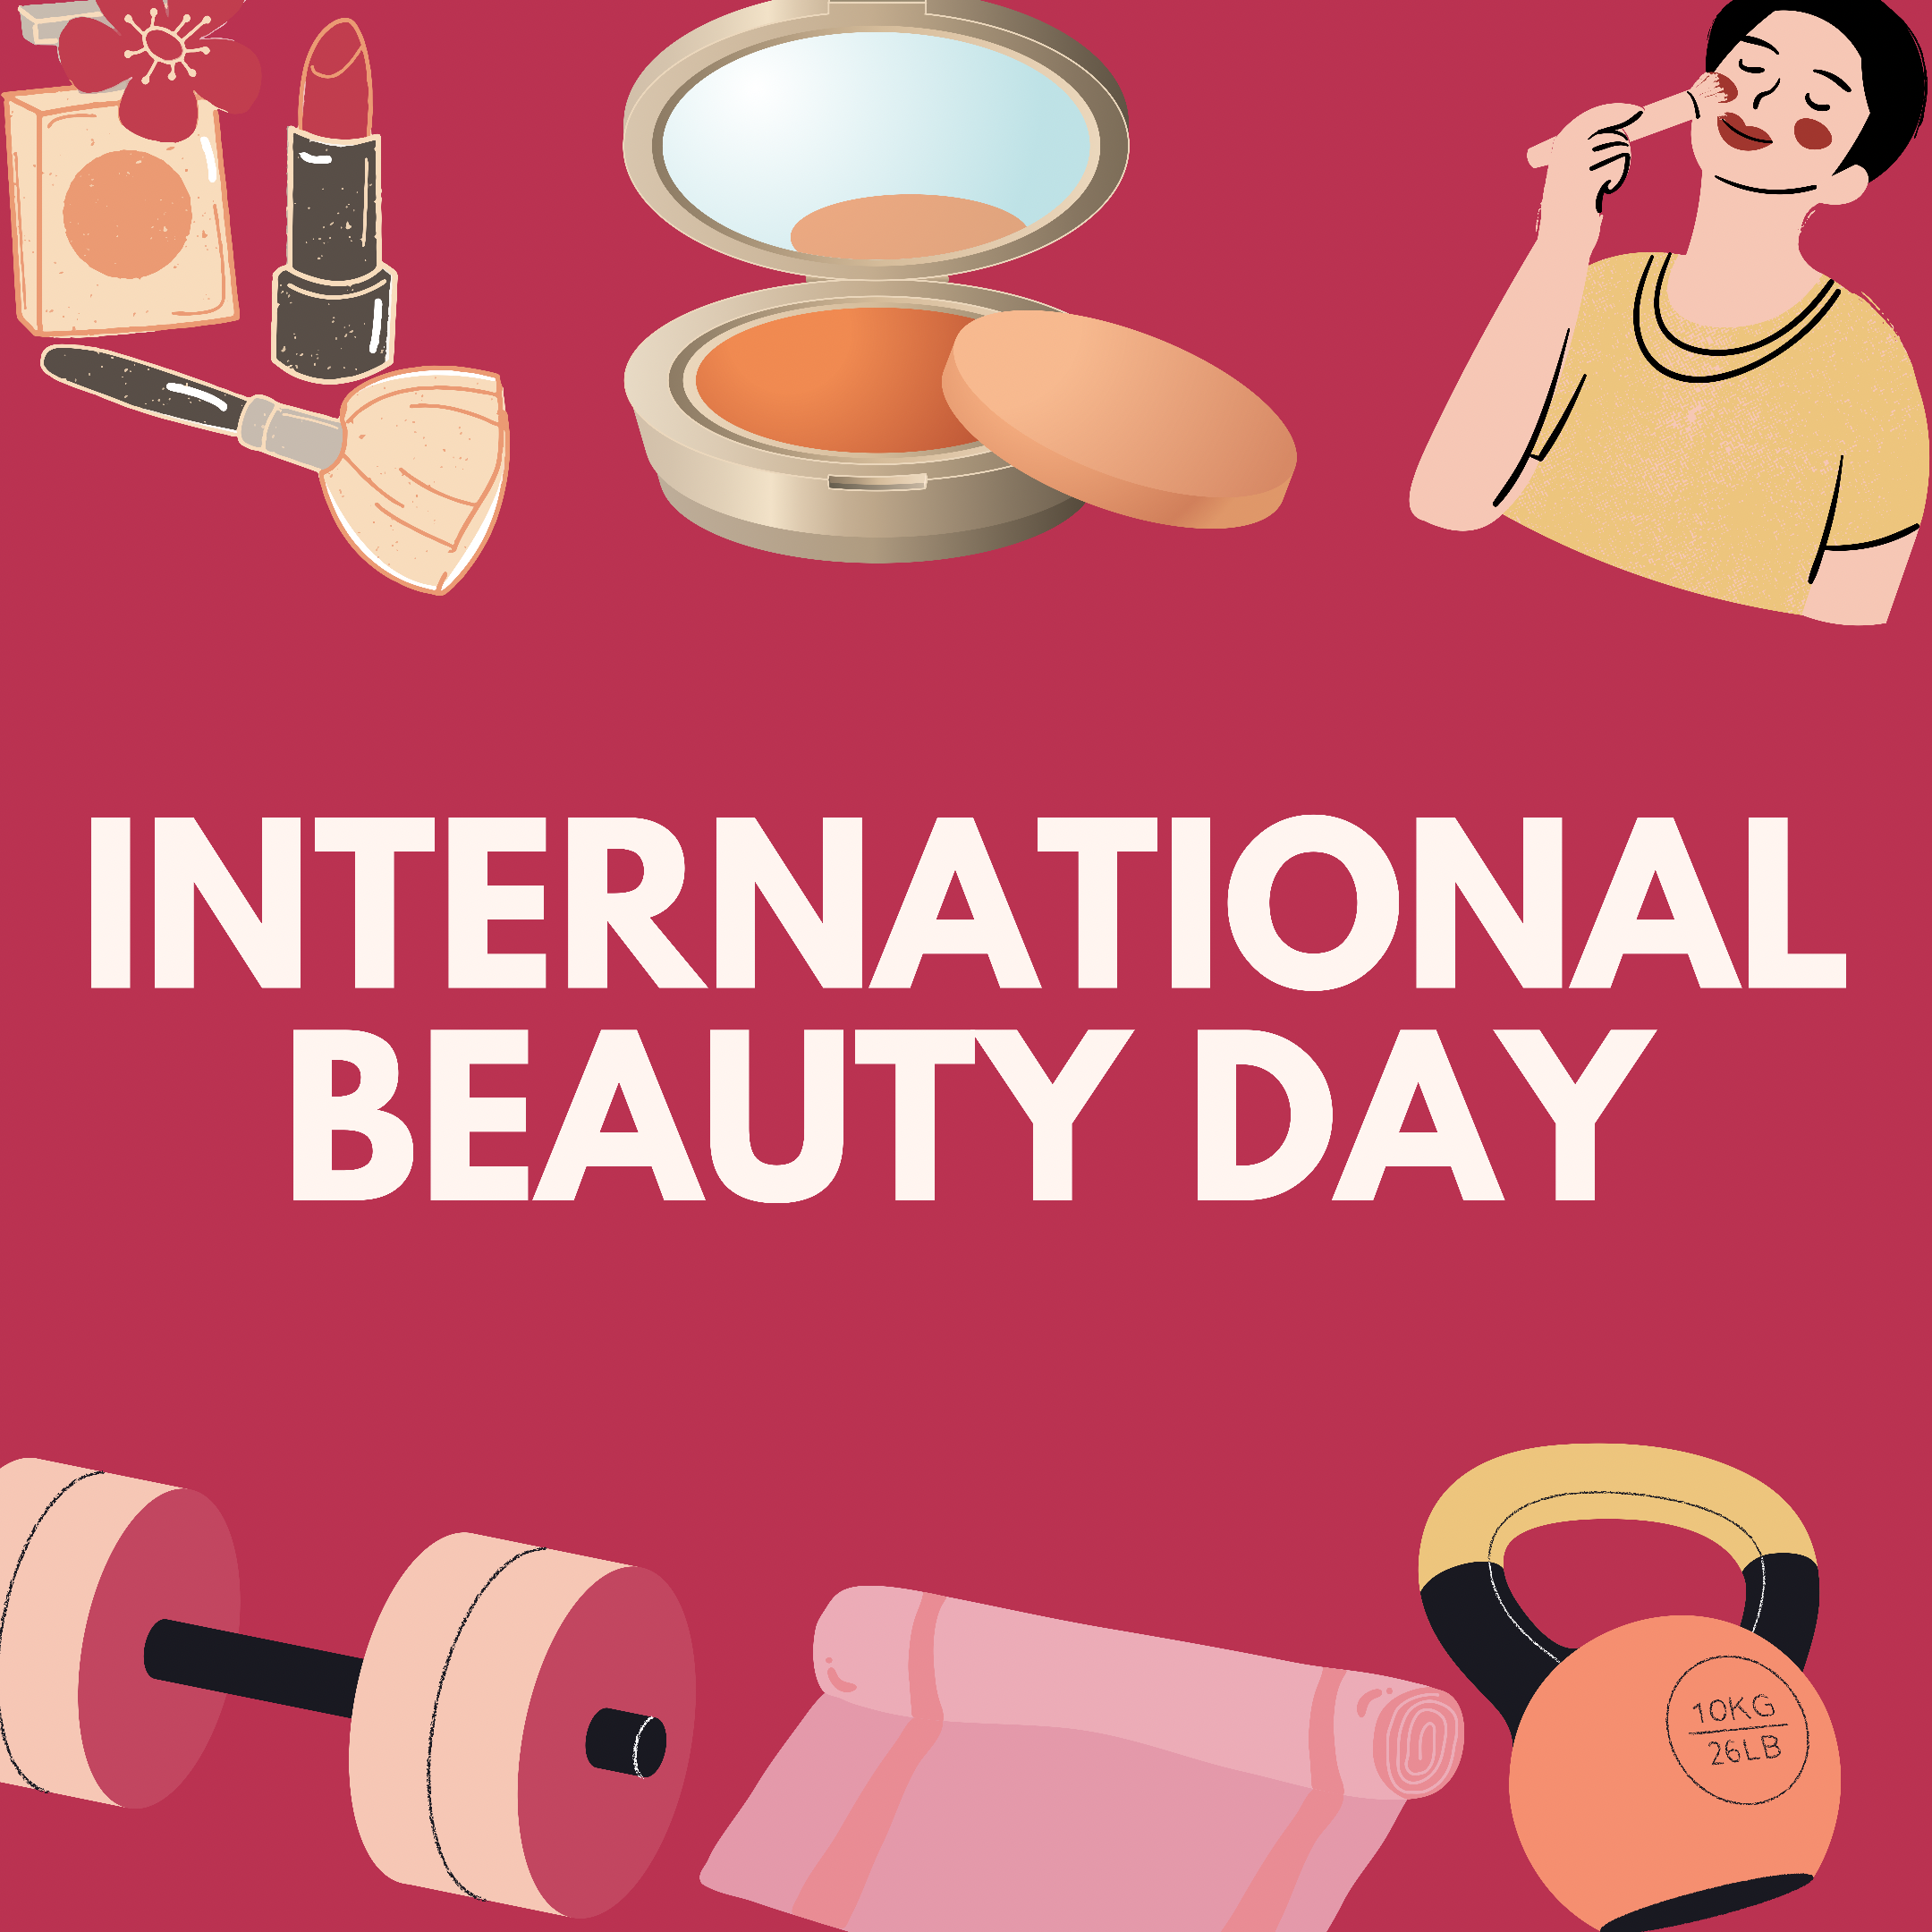 International Beauty Day: Google Reveals Nigeria’s Top Beauty And Fitness Searches Since COVID-19 Pandemic